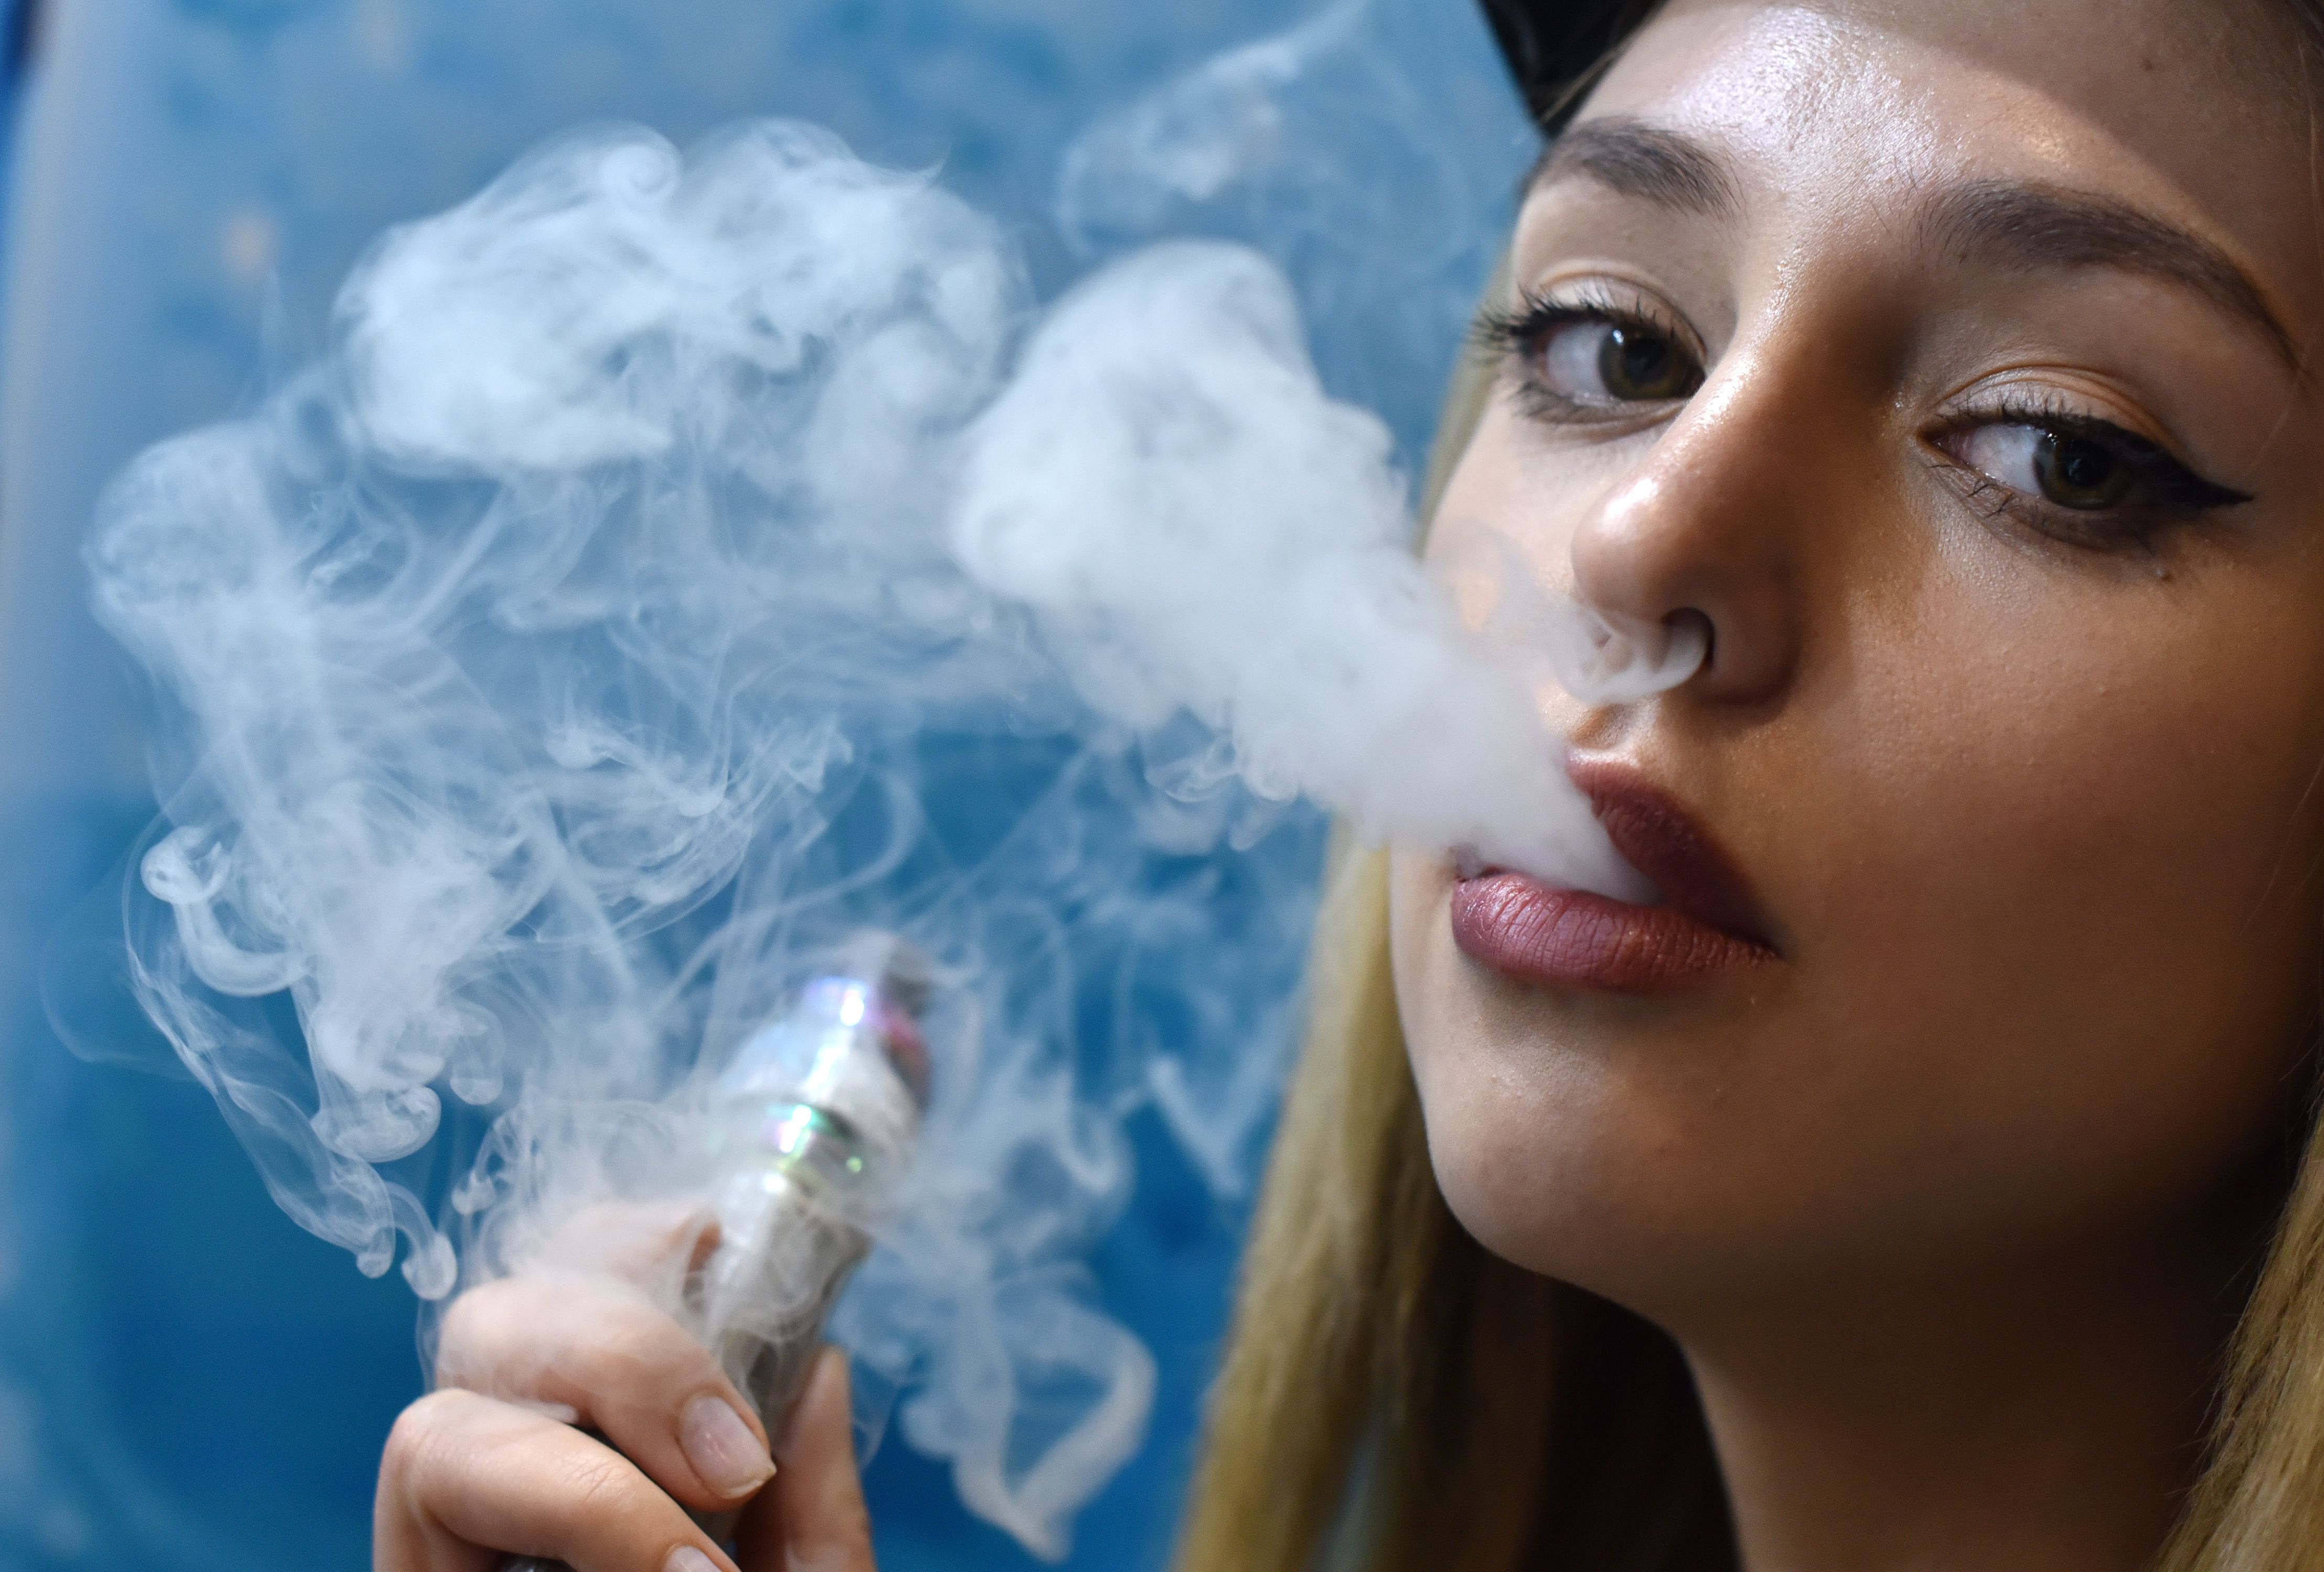 FDA launches 'Magic' television ad campaign to curb teen vaping